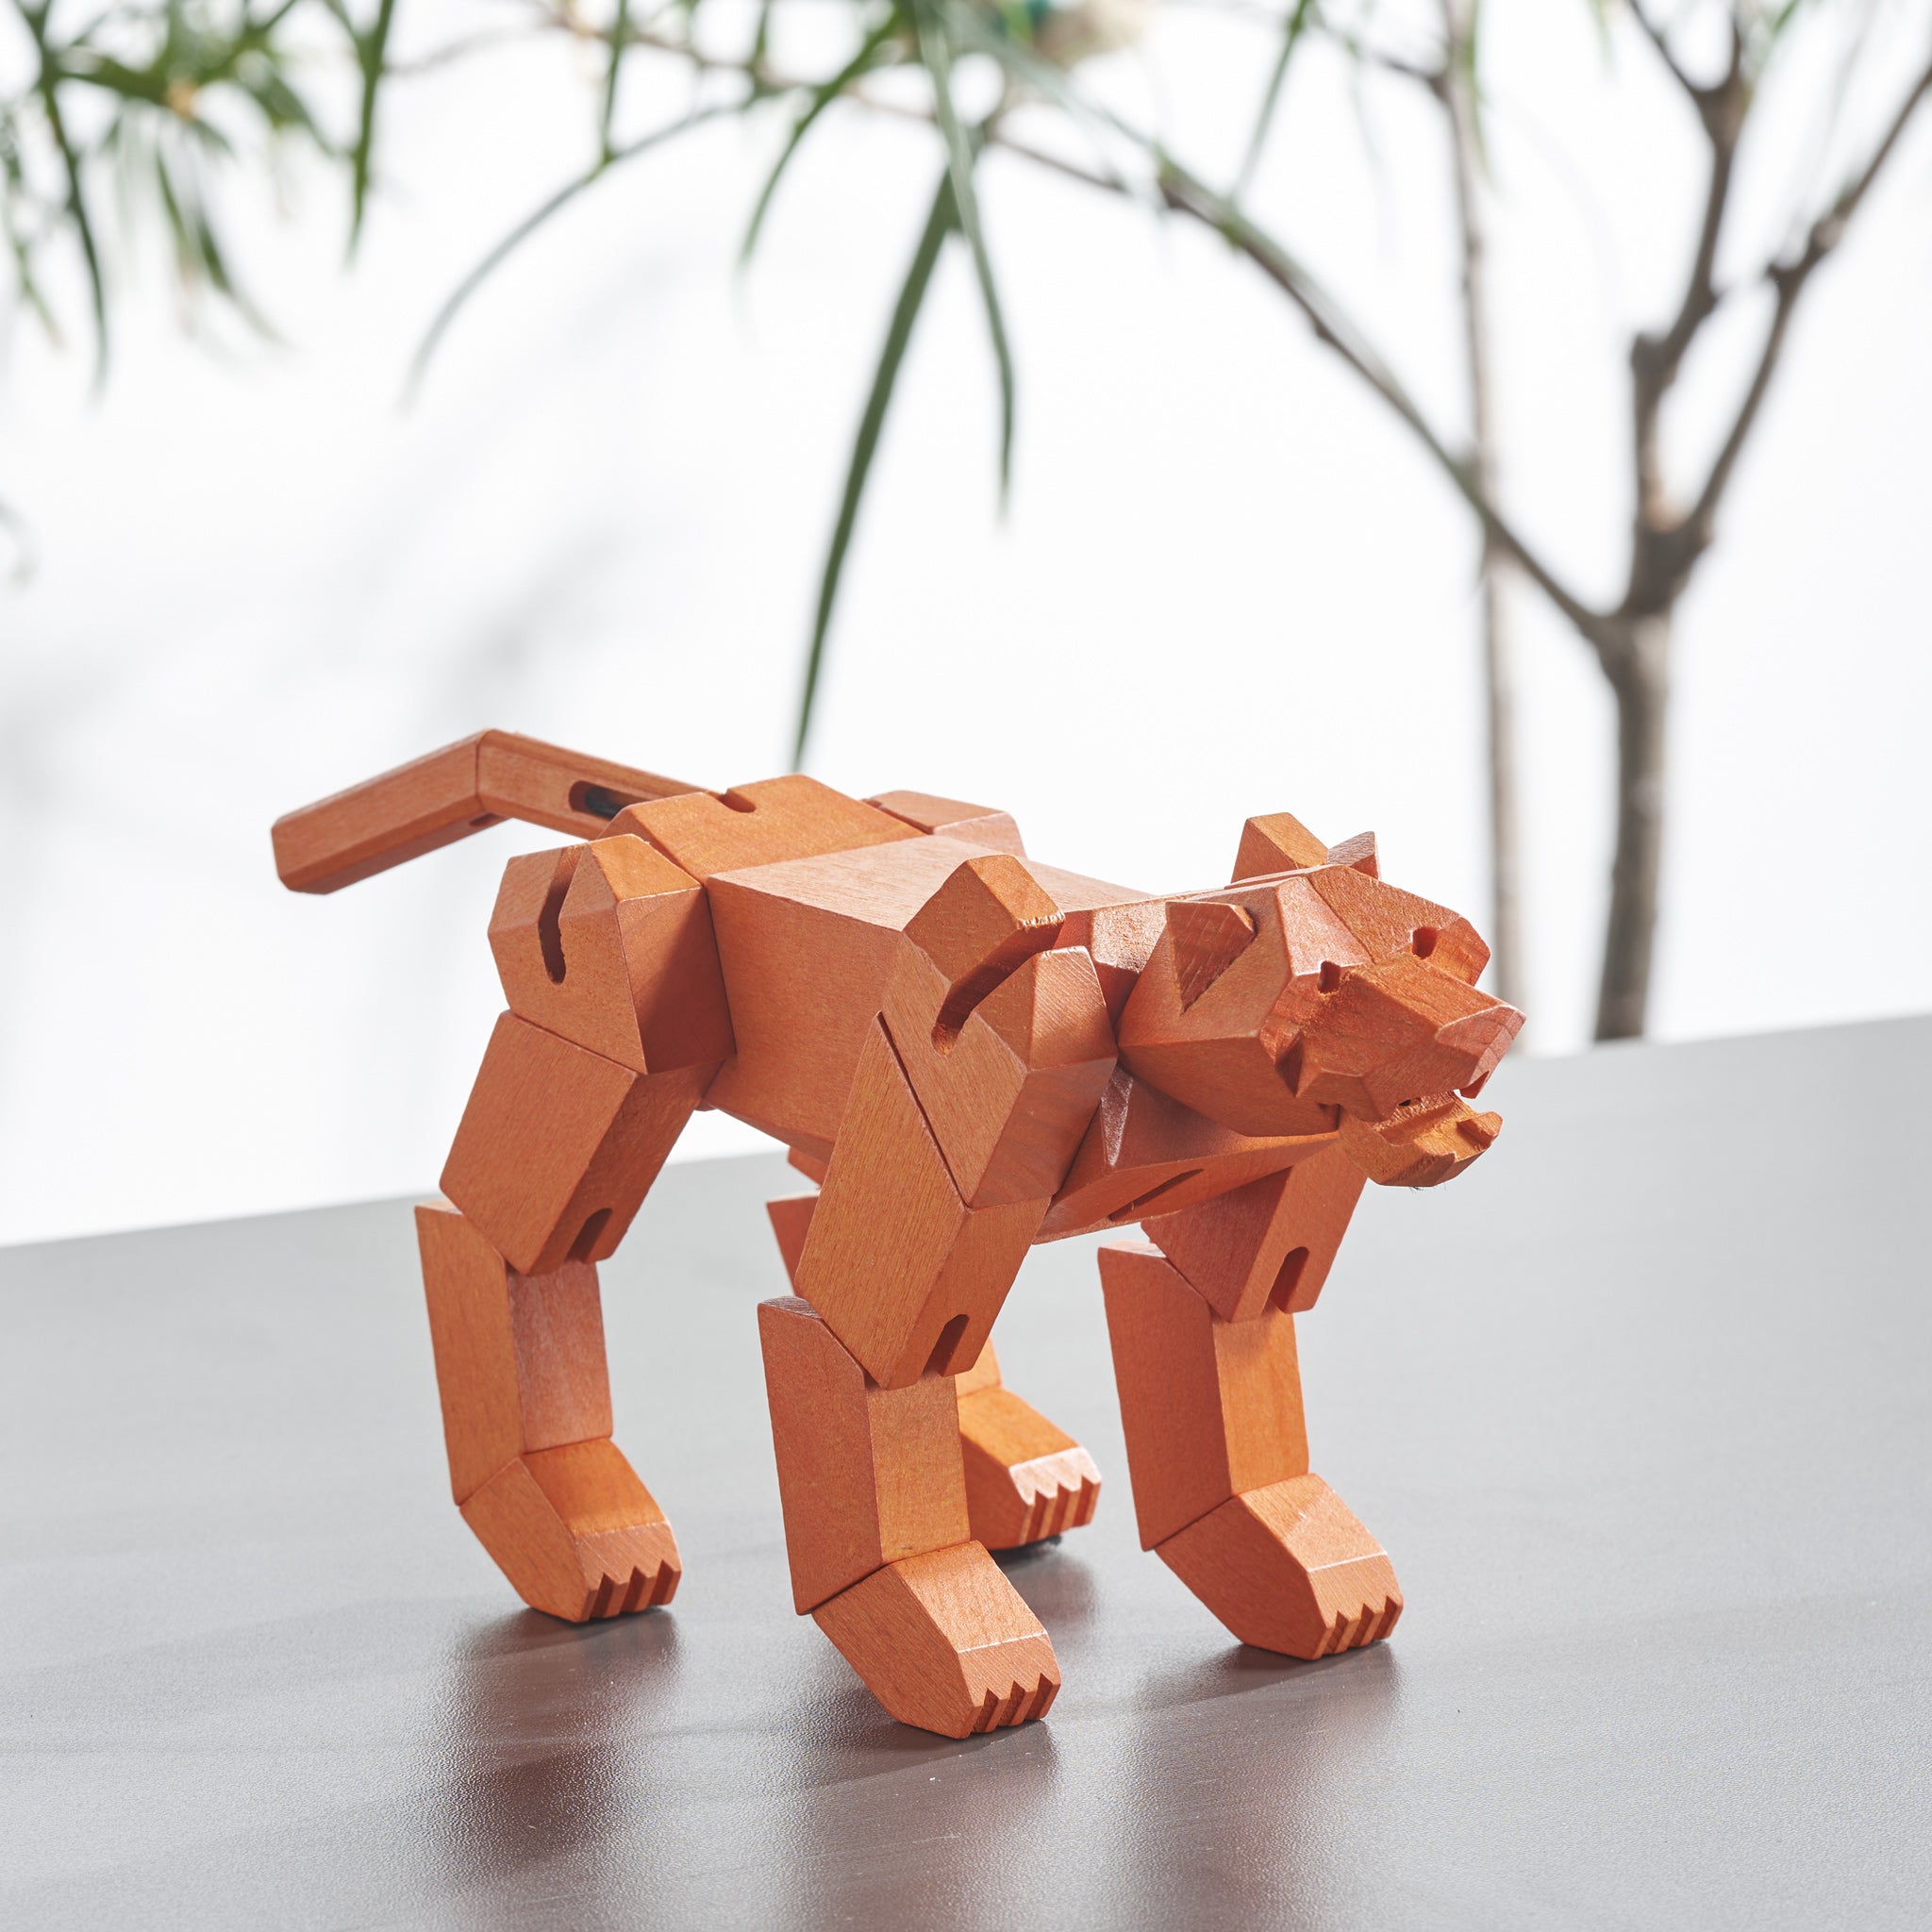 Morphits ® Tiger Wooden Toy Playset Puzzle Orange with Tree